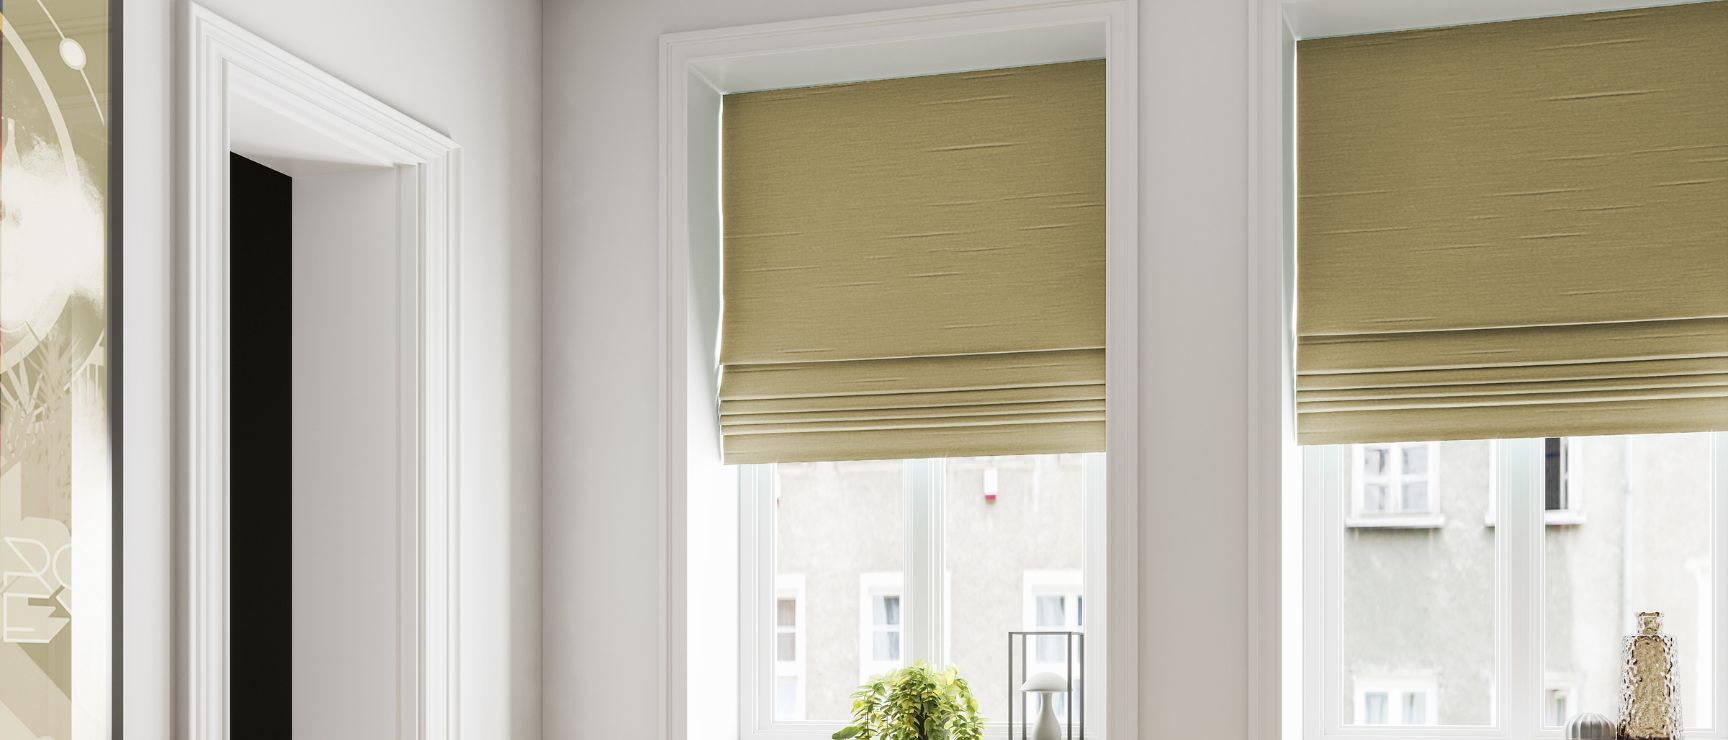 Roman Blinds will not lower